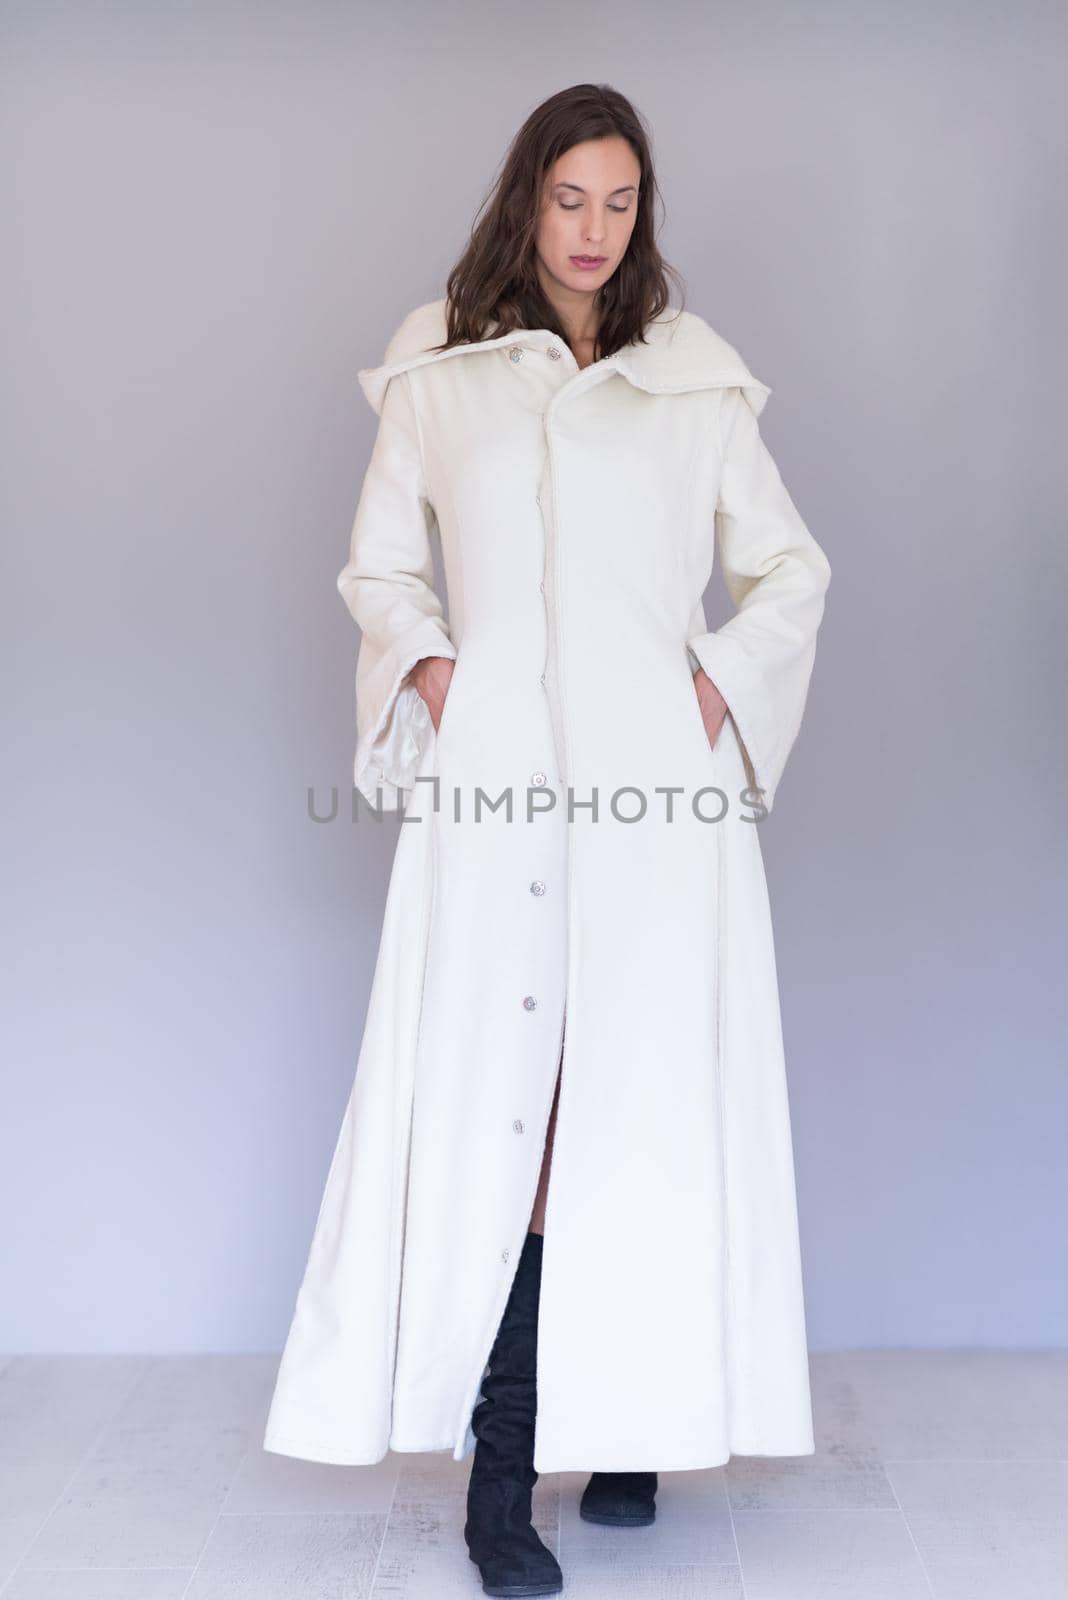 portrait of Beautiful young woman wearing a white coat with hood isolated on white background